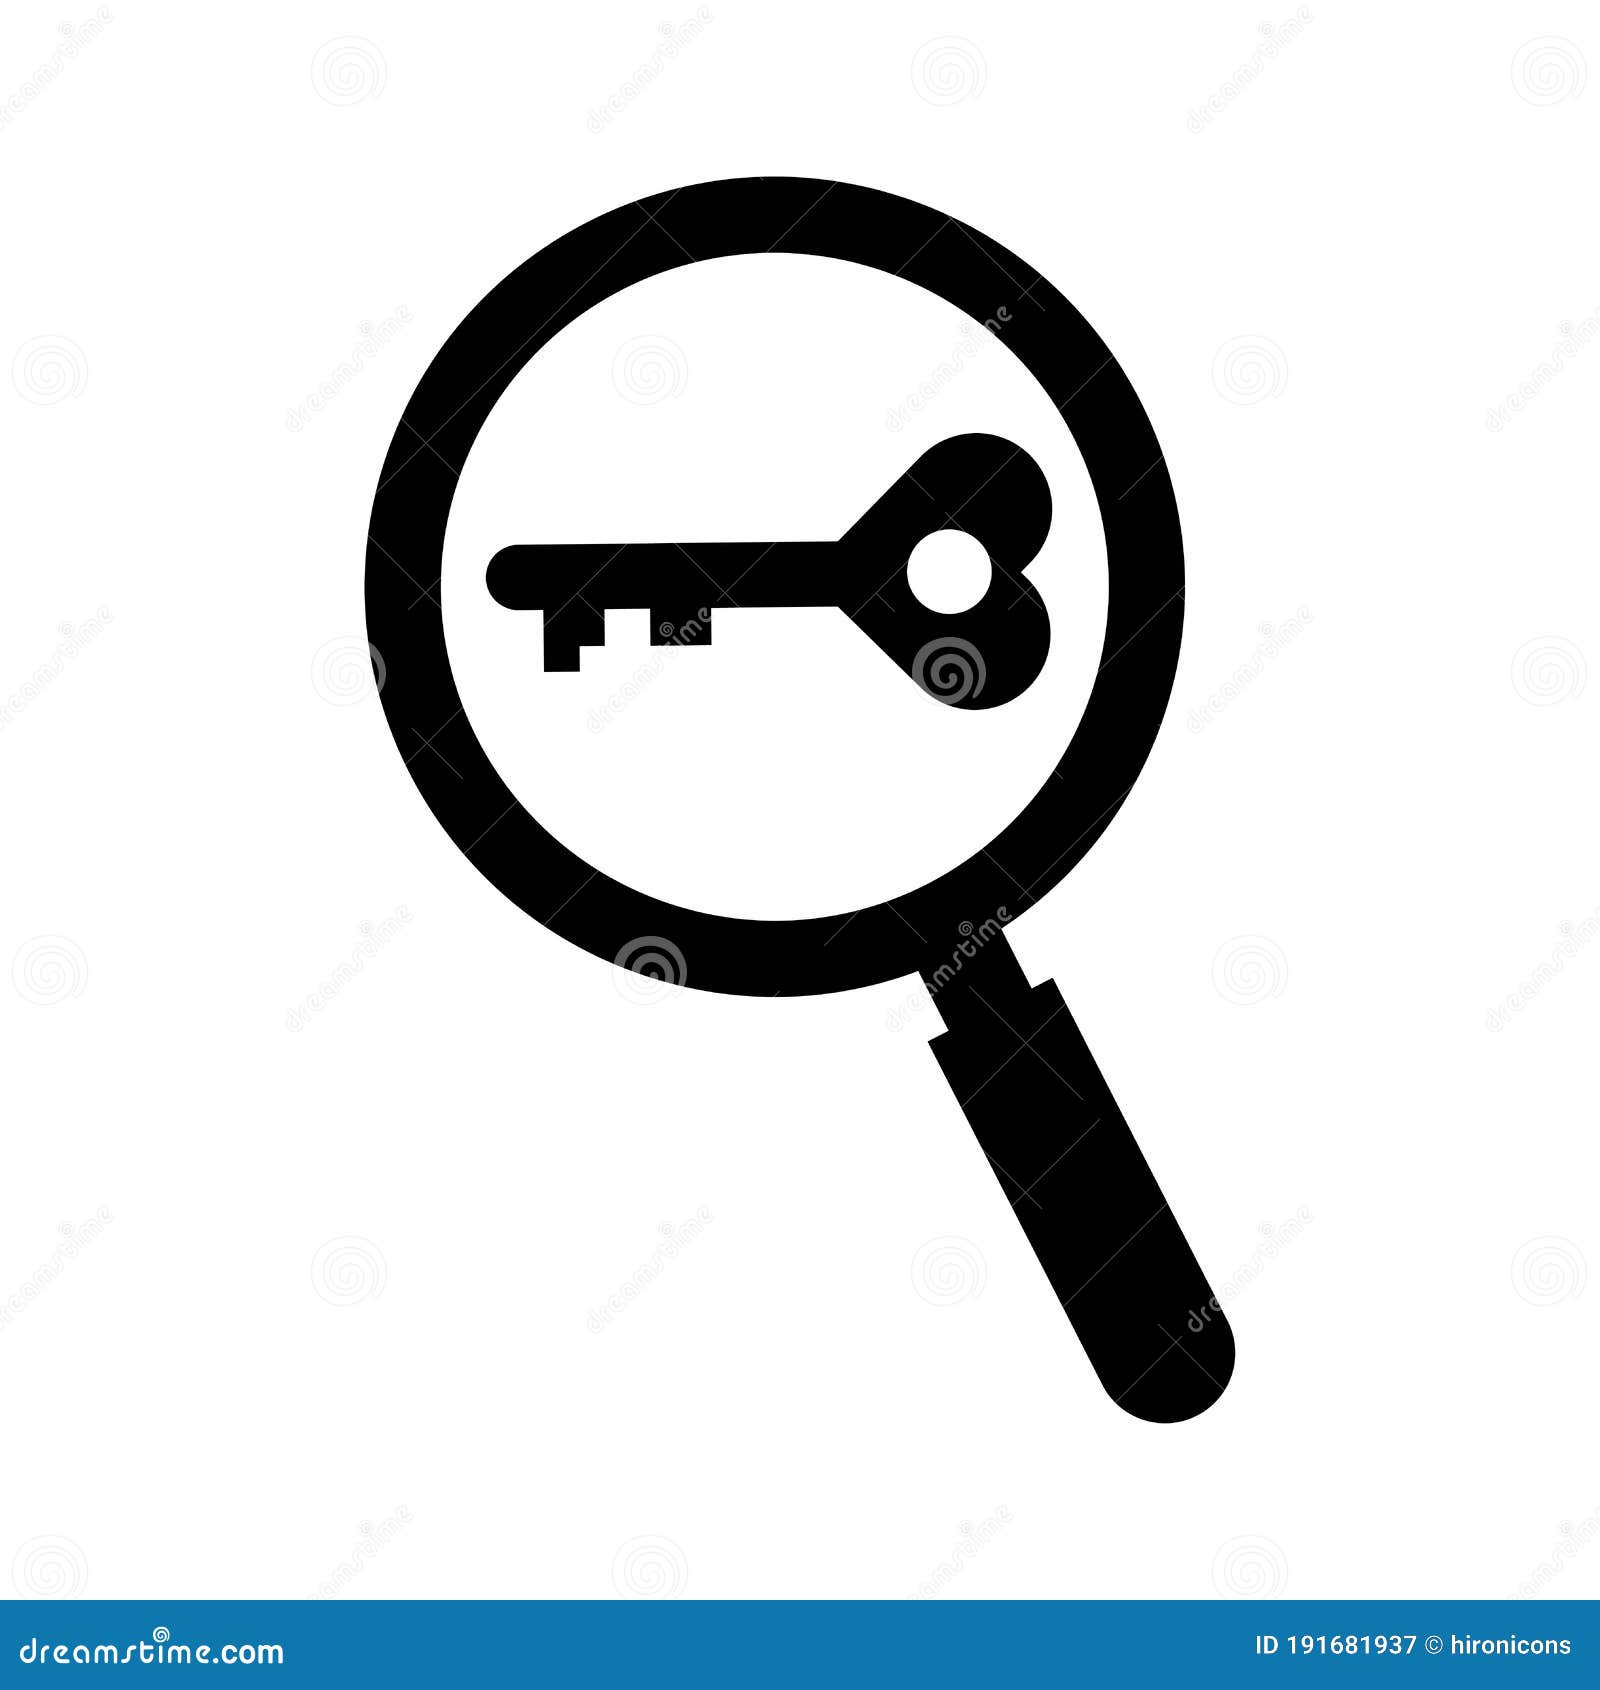 Keyword Search Icon Black Color Stock Vector Illustration Of Zoom Outline